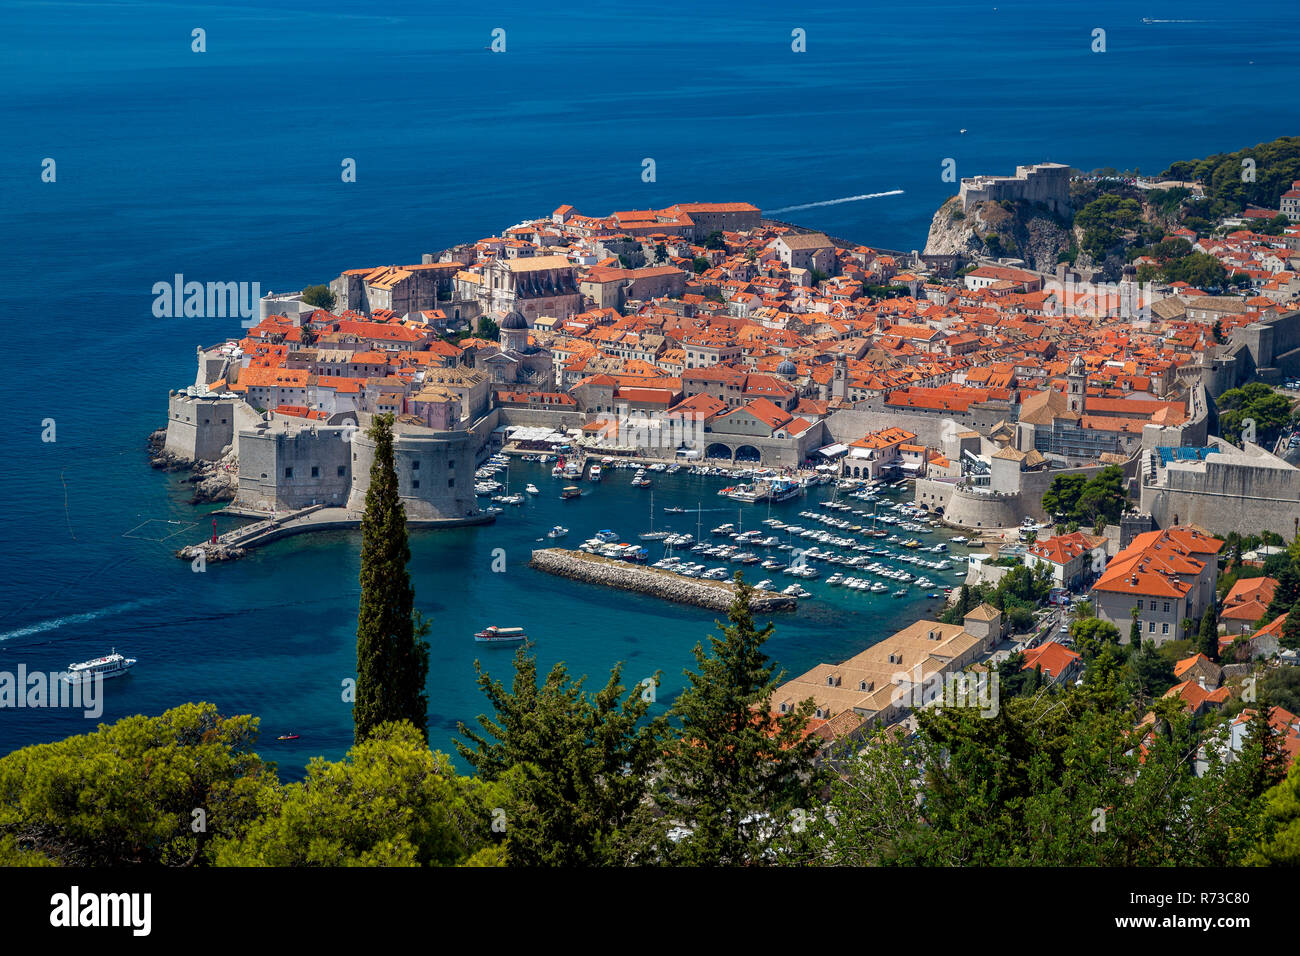 Dubrovnik Old Town City Walls looking from above  , travel image while on holiday Walk the city walls to see the beauty of the old town. Stock Photo